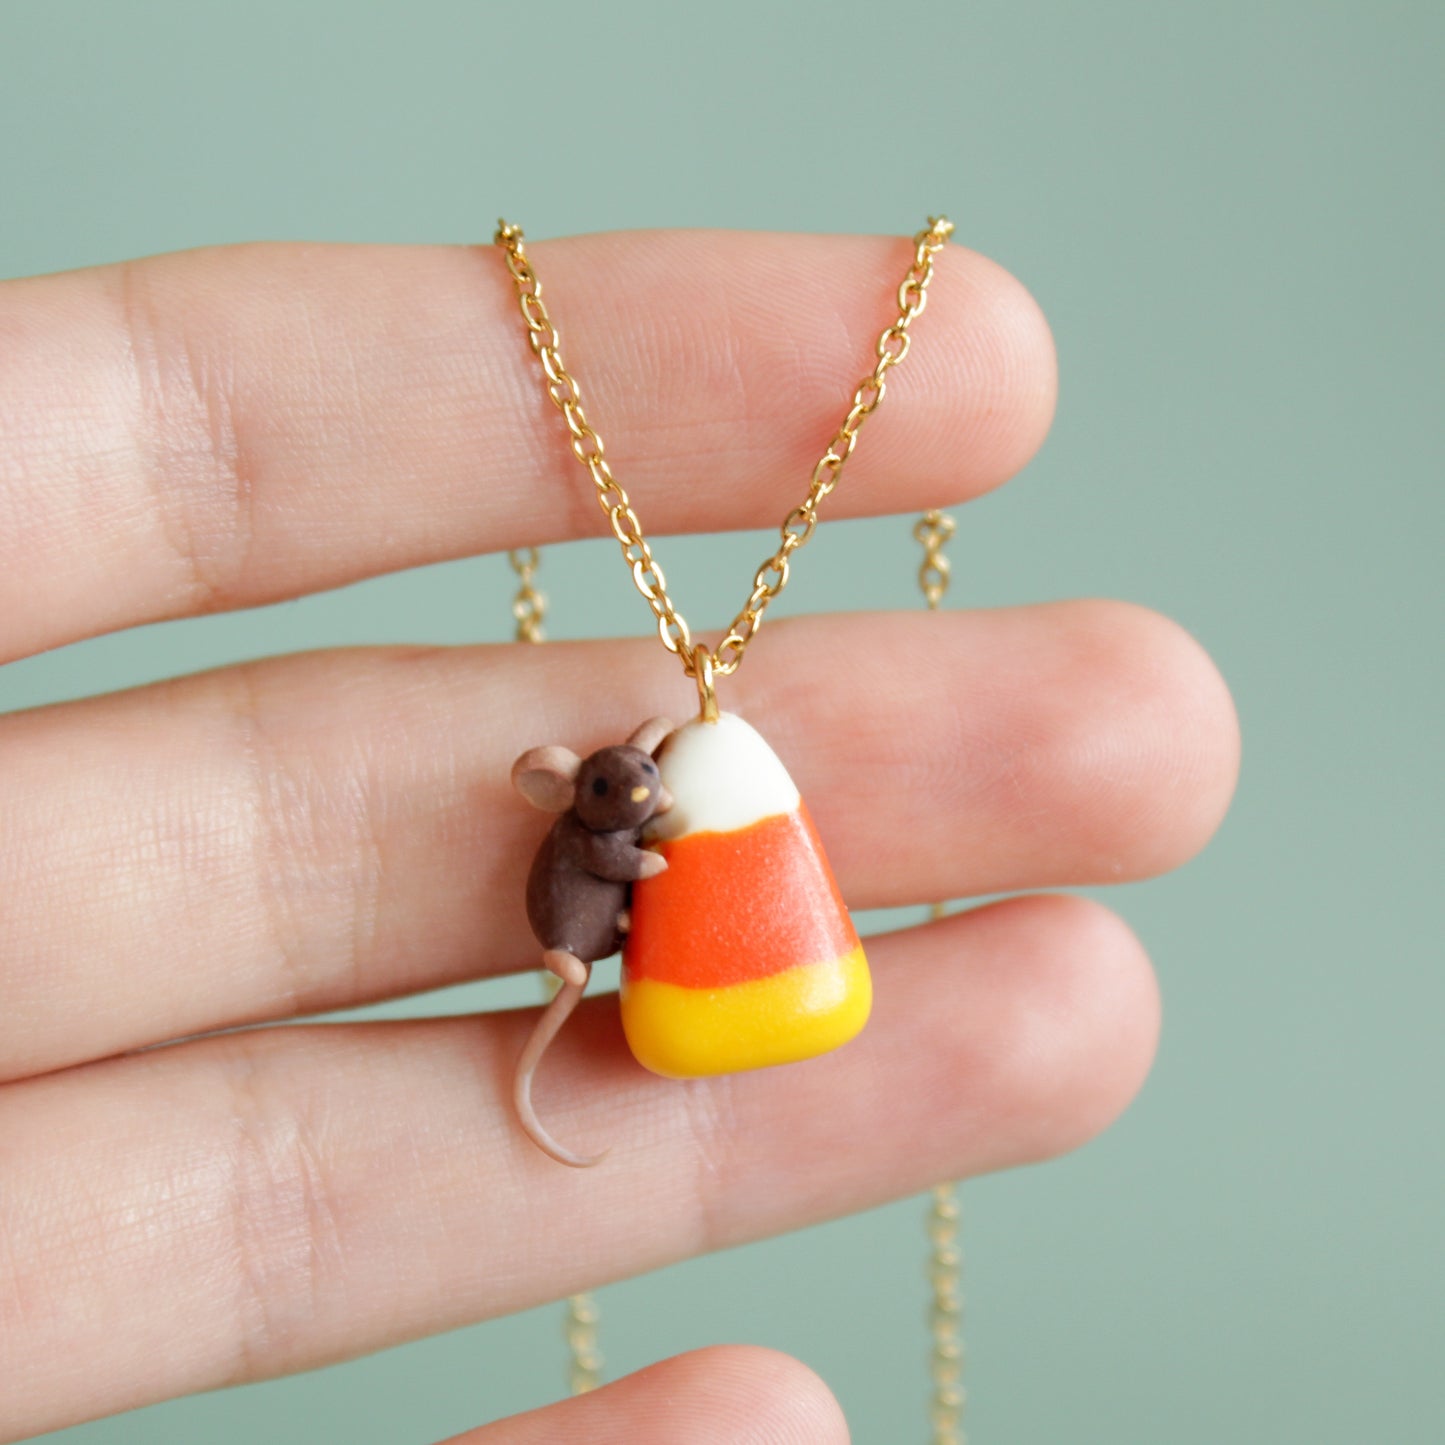 Candy Corn Rat Necklace in Polymer Clay